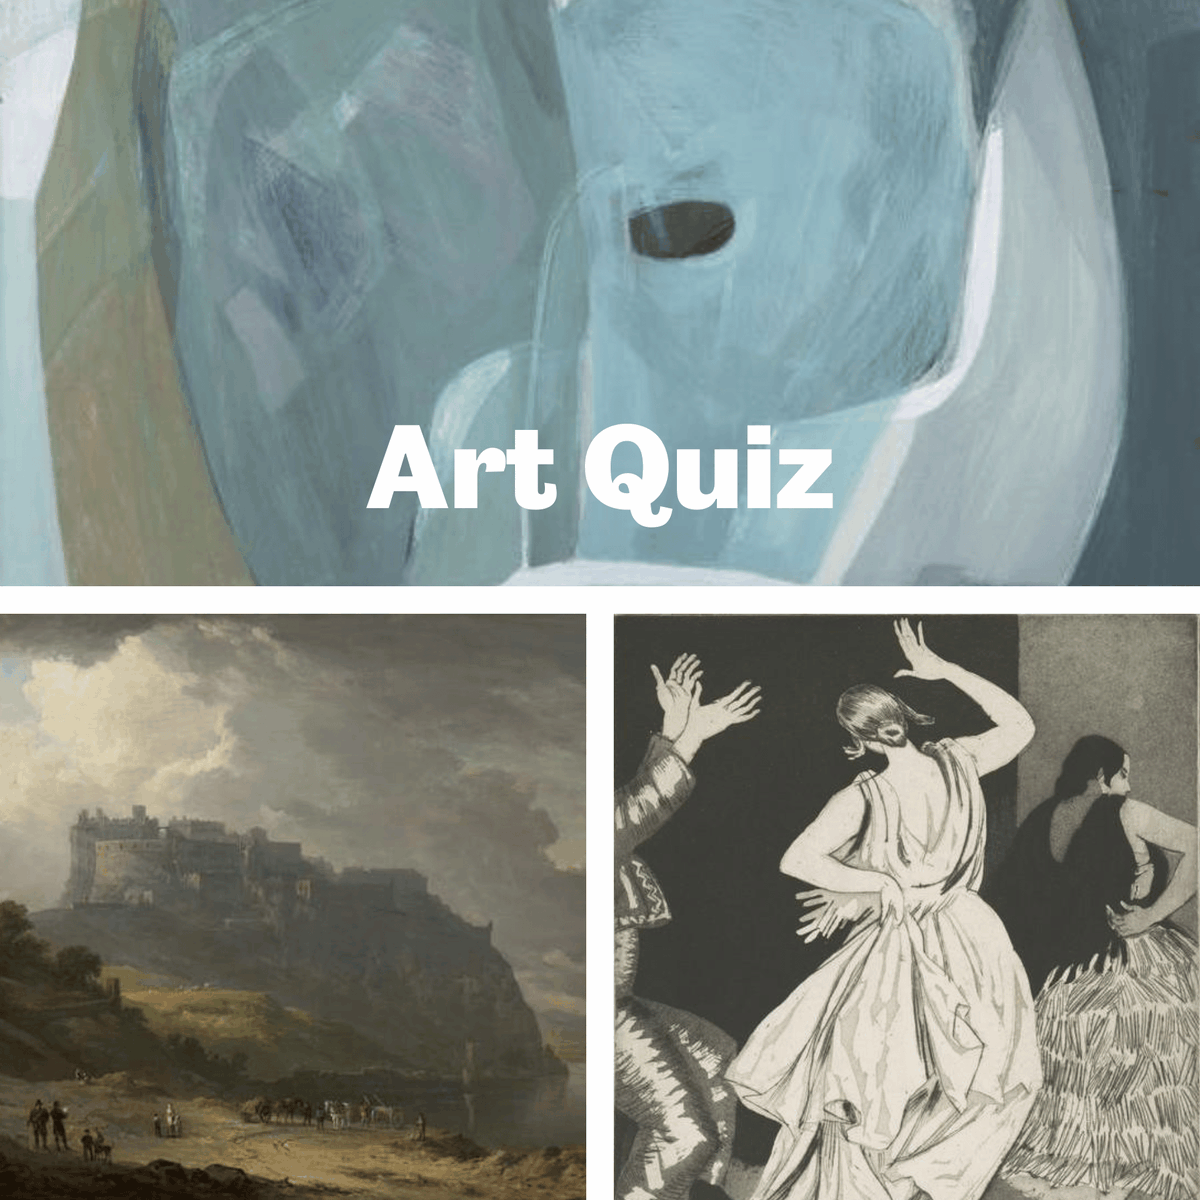 Happy Friday everyone 🎉 Let’s kick off this weekend with the #FridayArtQuiz ♥ It’s time to discover your collection today ☺ Good luck! Find the quiz here ➡ bit.ly/3Qk87aR